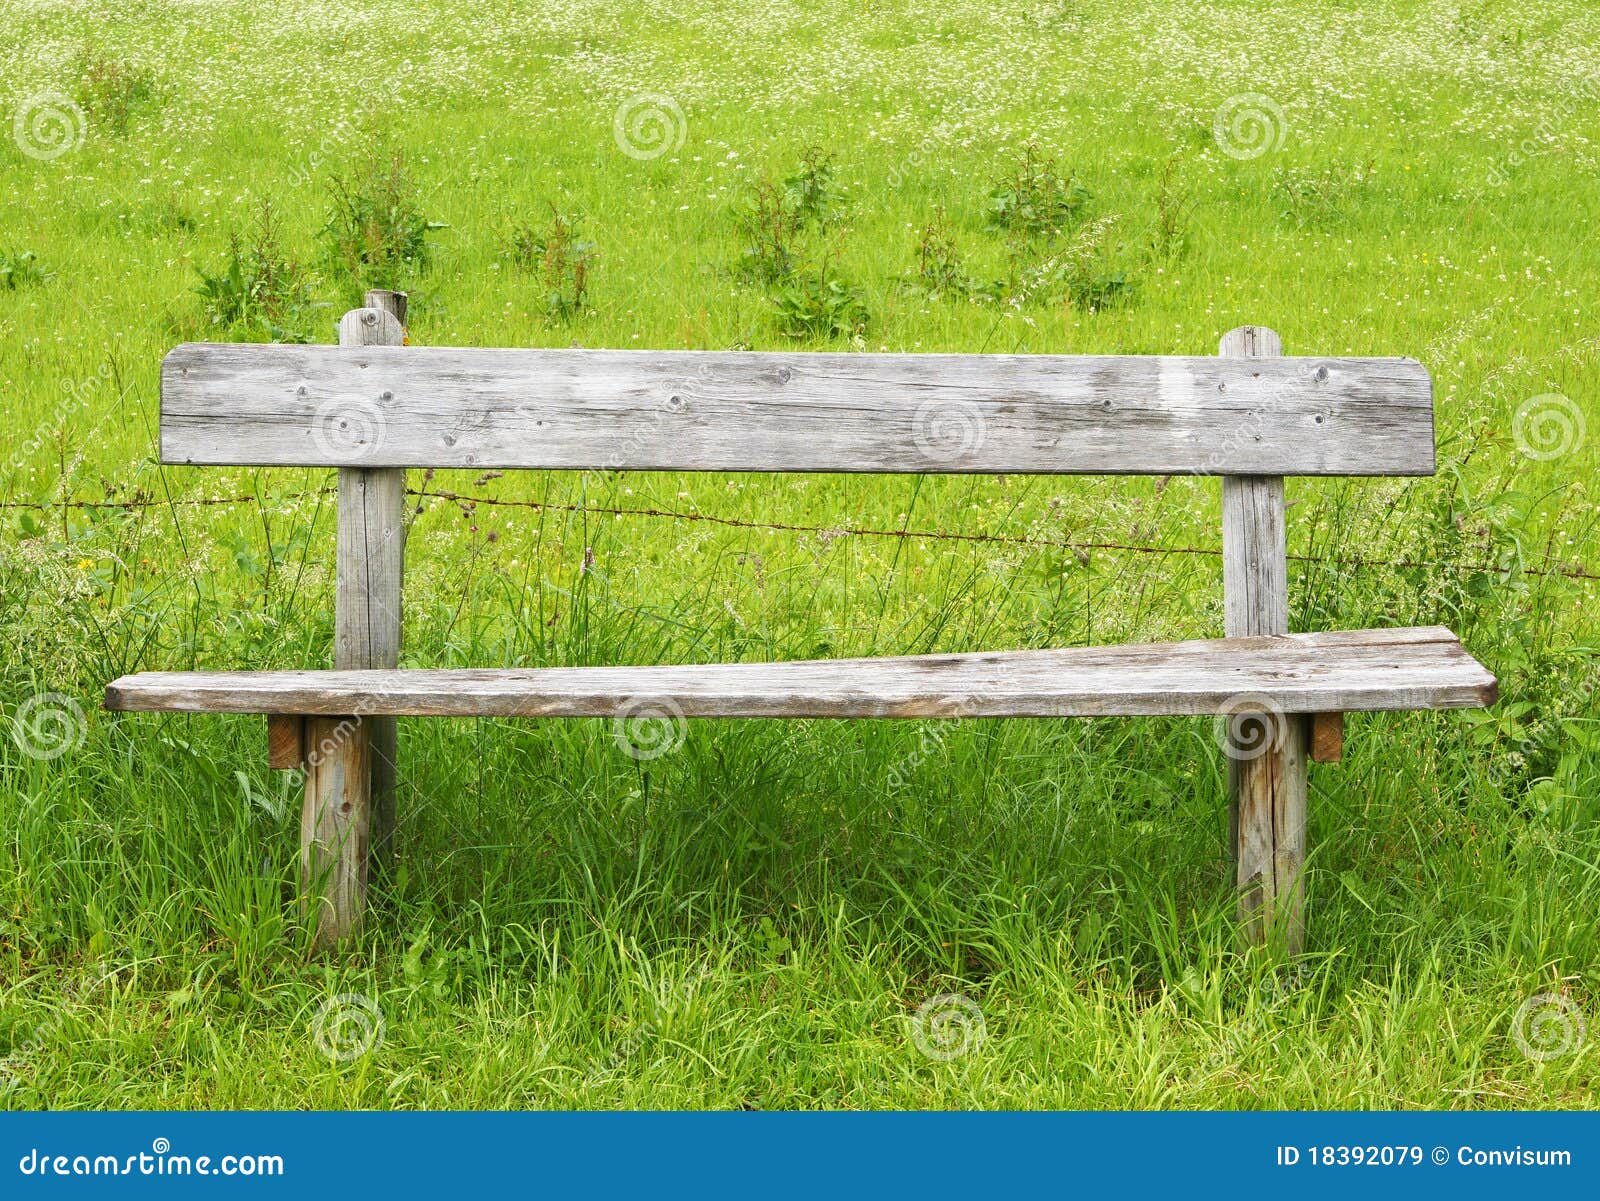 Old Wooden Bench Royalty Free Stock Images - Image: 18392079